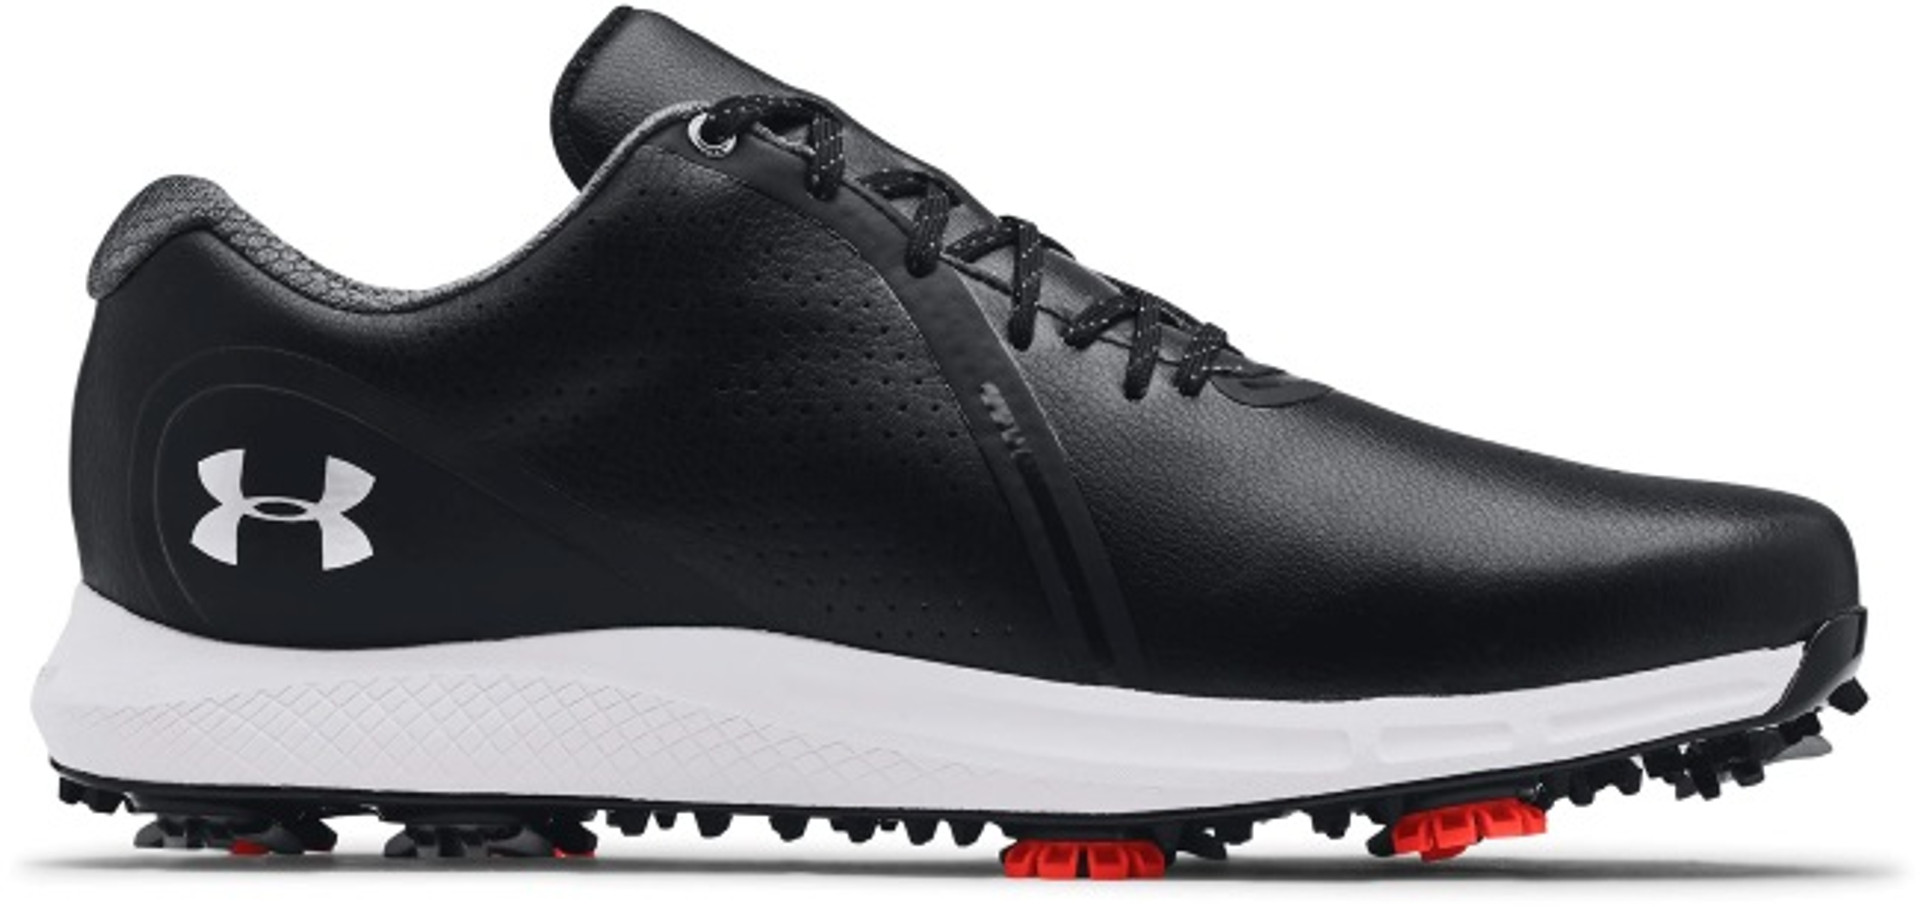 Under Armour Golf Charged Draw Shoes | RockBottomGolf.com